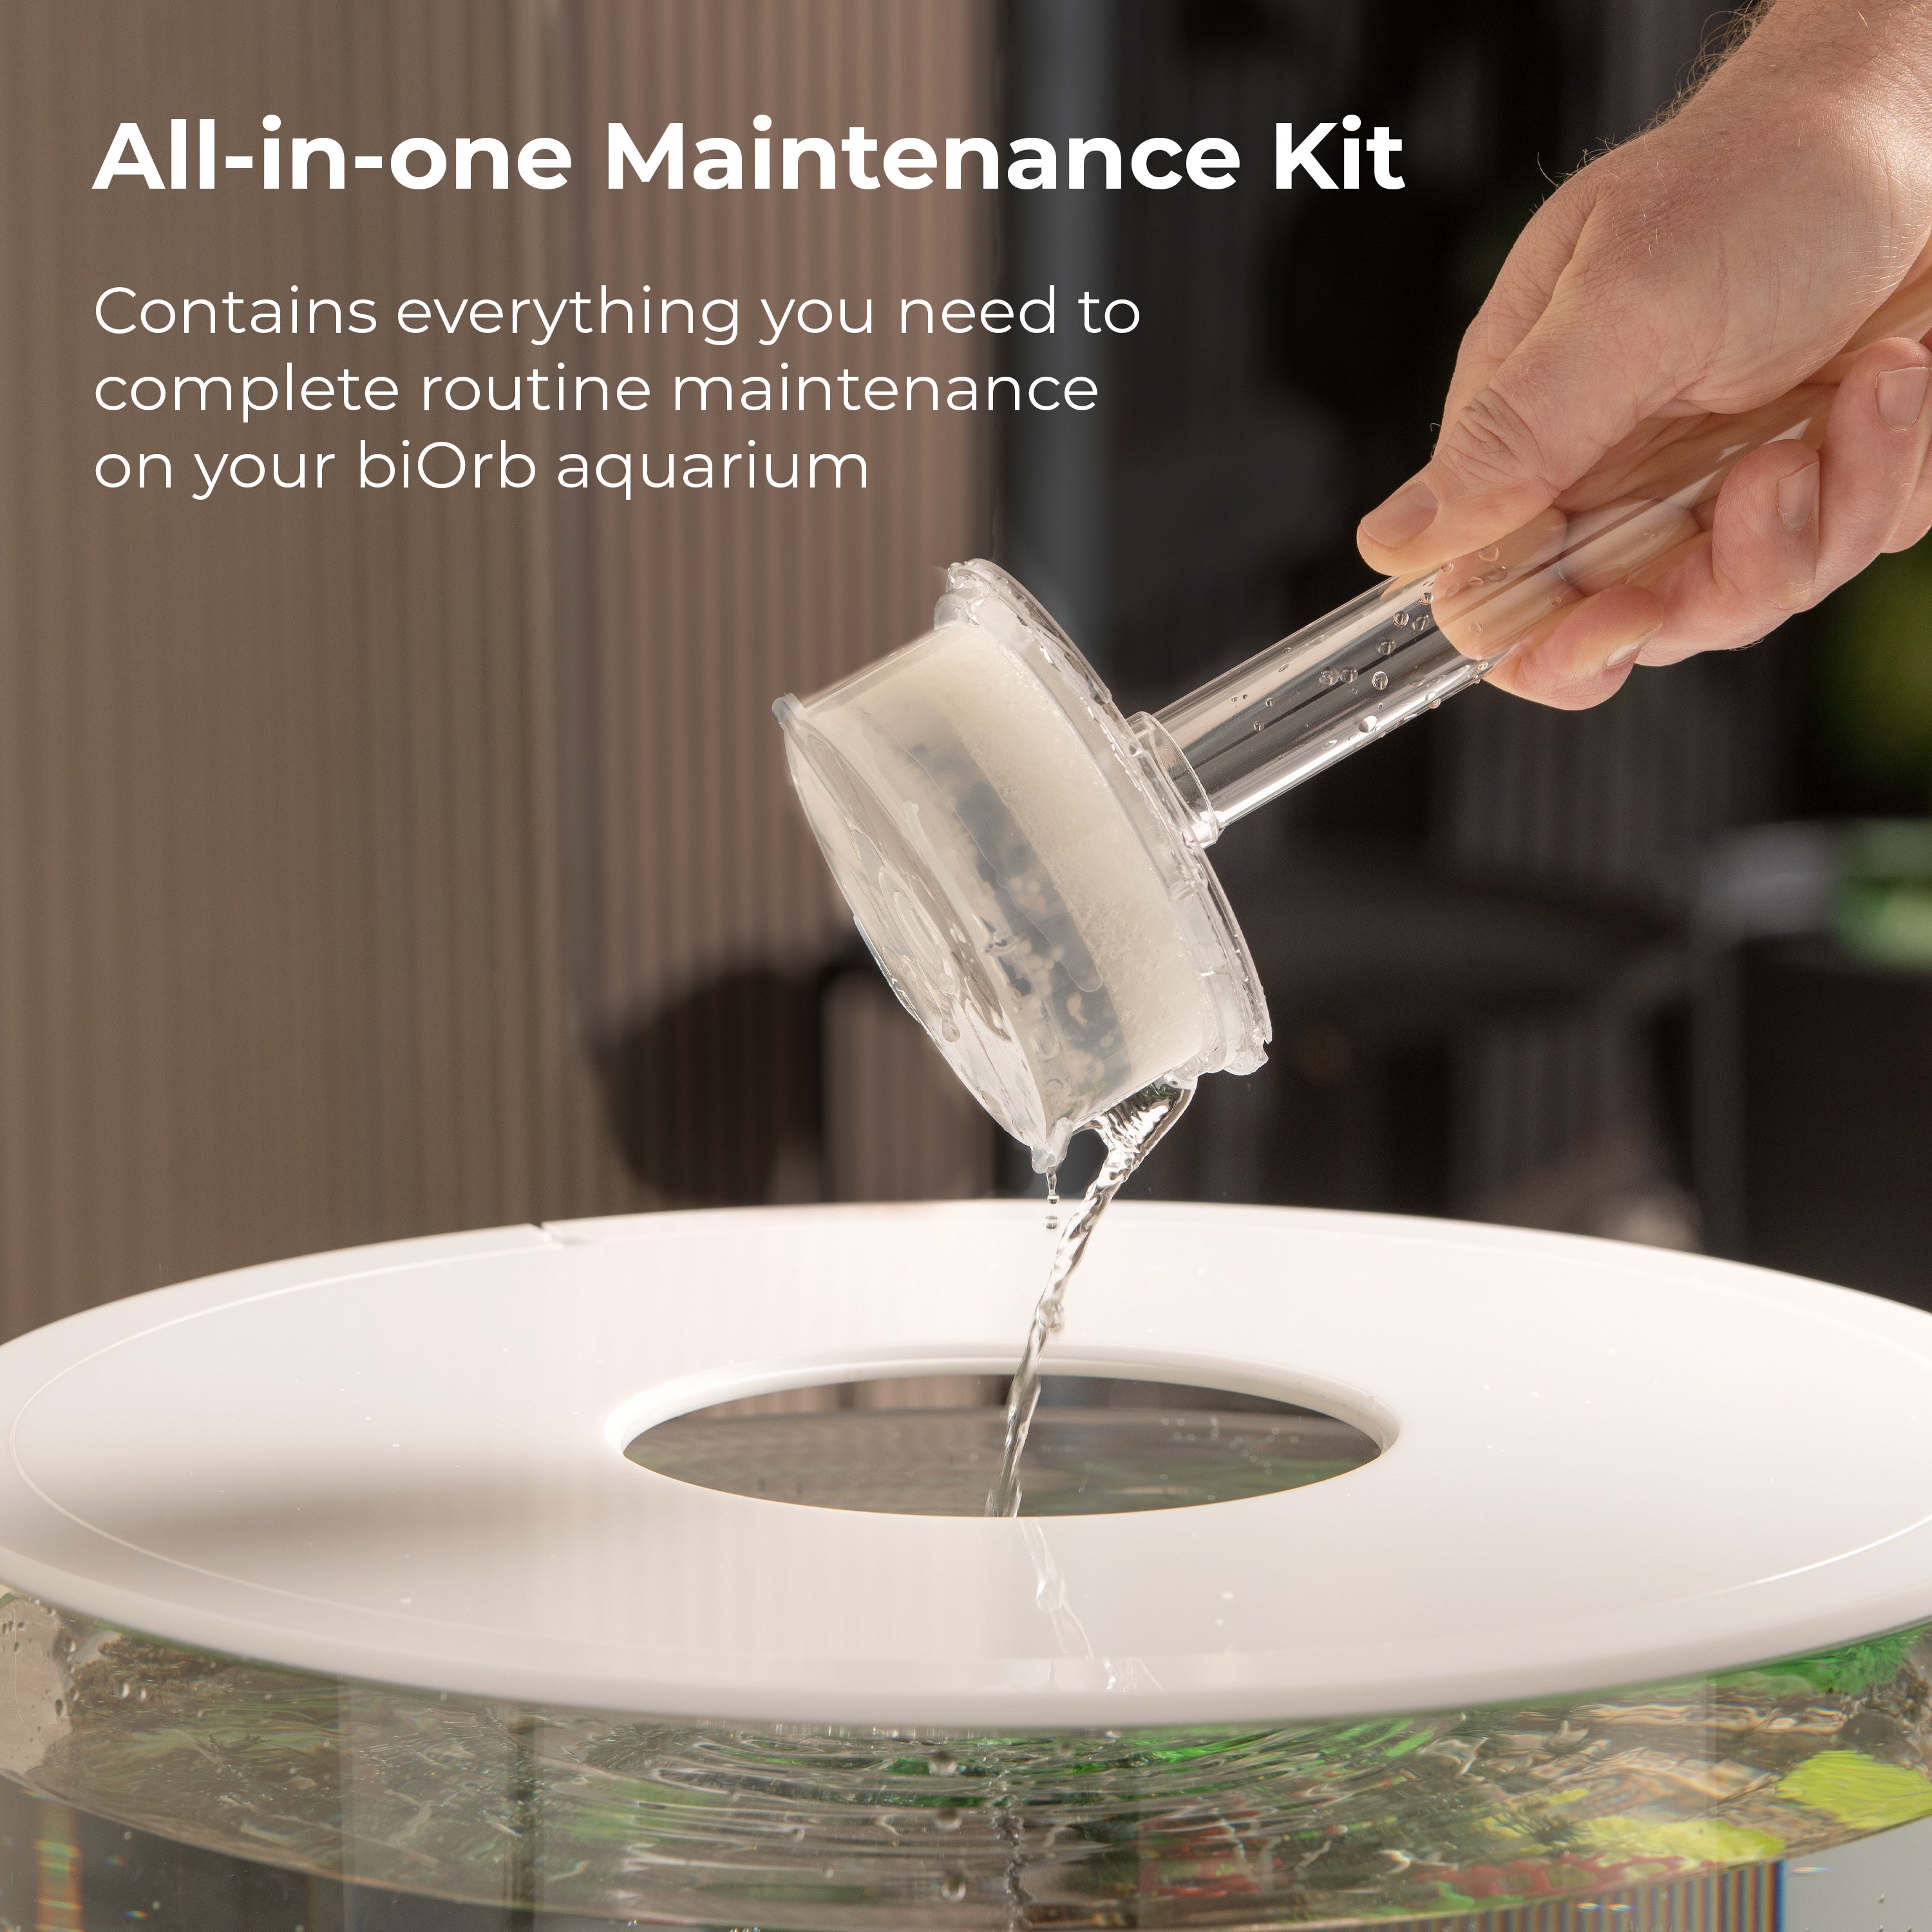 Maintenance Kit - All-in-one